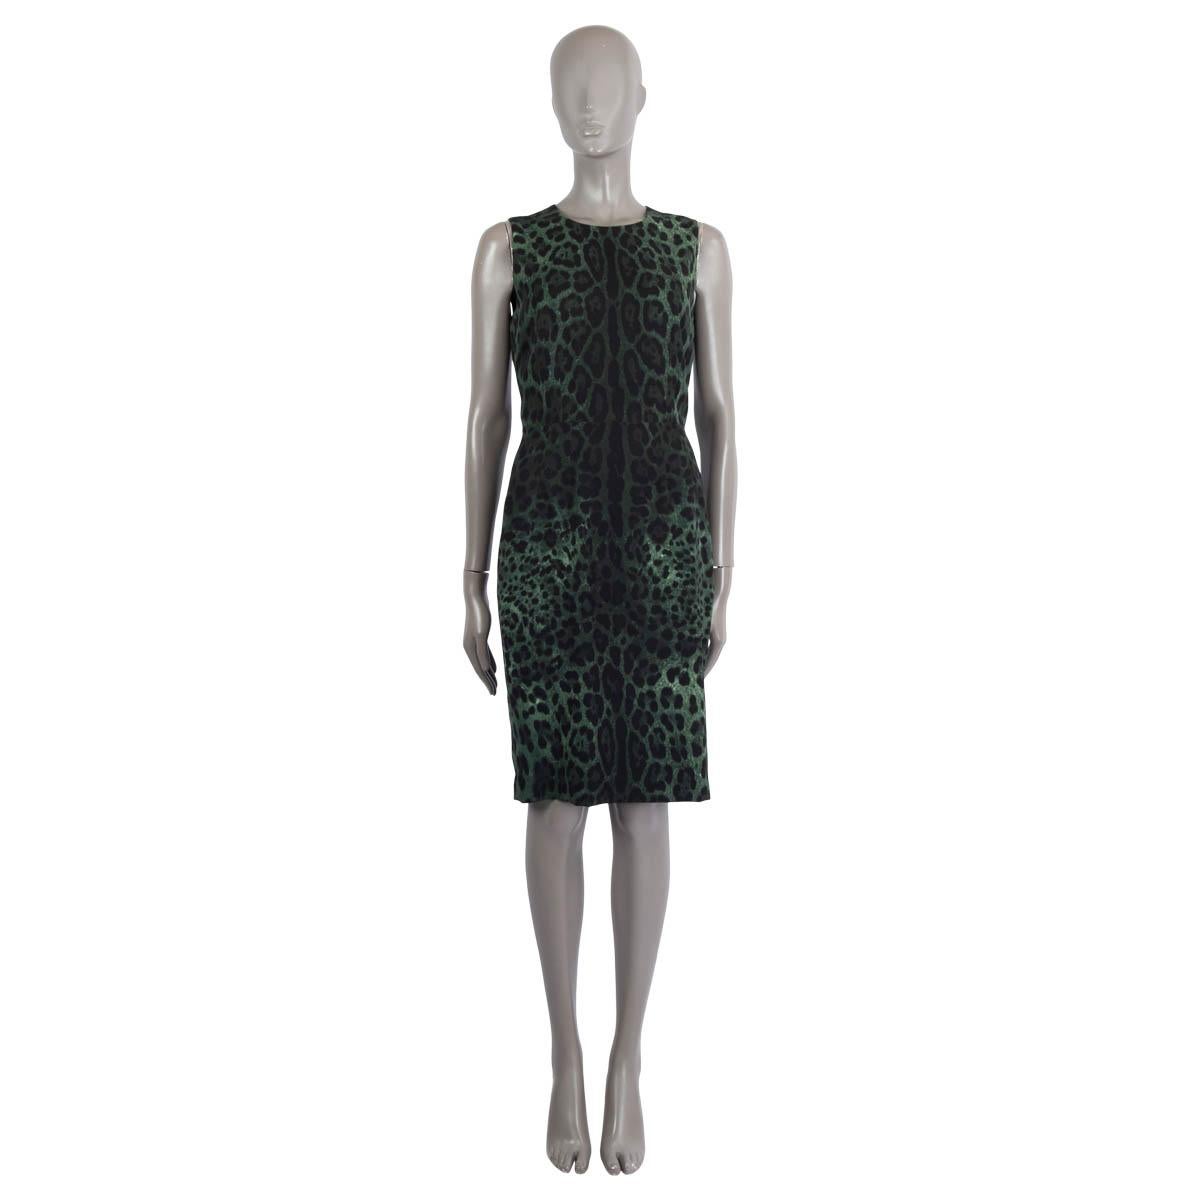 100% authentic Dolce & Gabbana sleeveless leopard-print dress in black and green silk (95%) and elastane (5%). Features a slit on the back. Lined in black silk (95%) and elastane (5%). Opens with a concealed zipper and a hook on the back. Has been